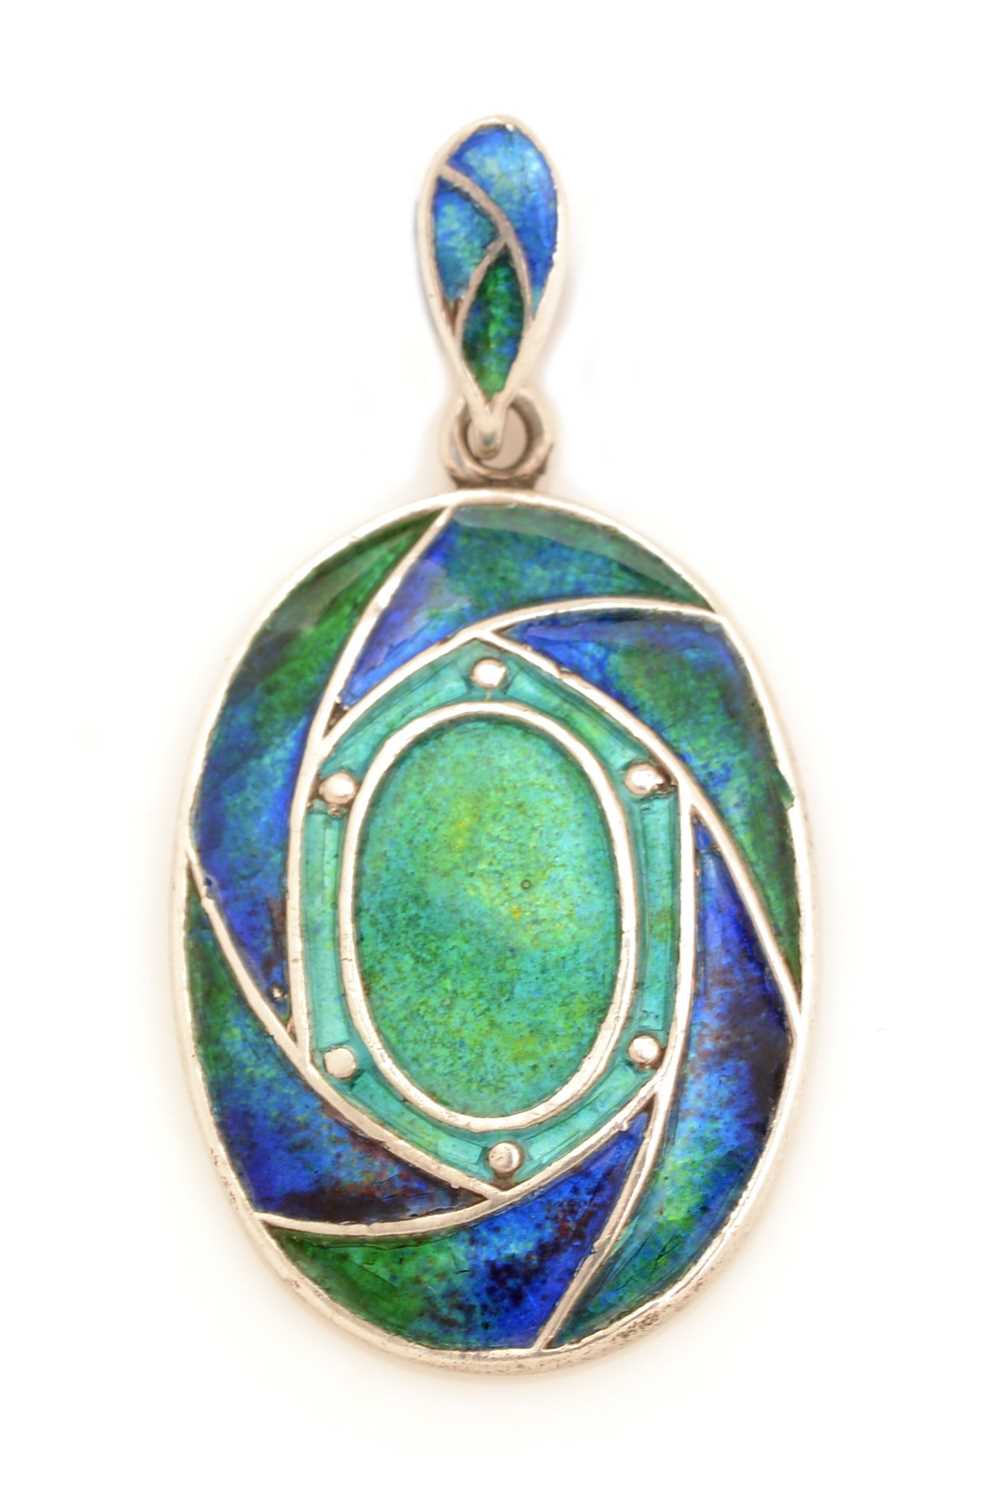 Lot 154 - An Arts & Crafts enamel and silver pendant.